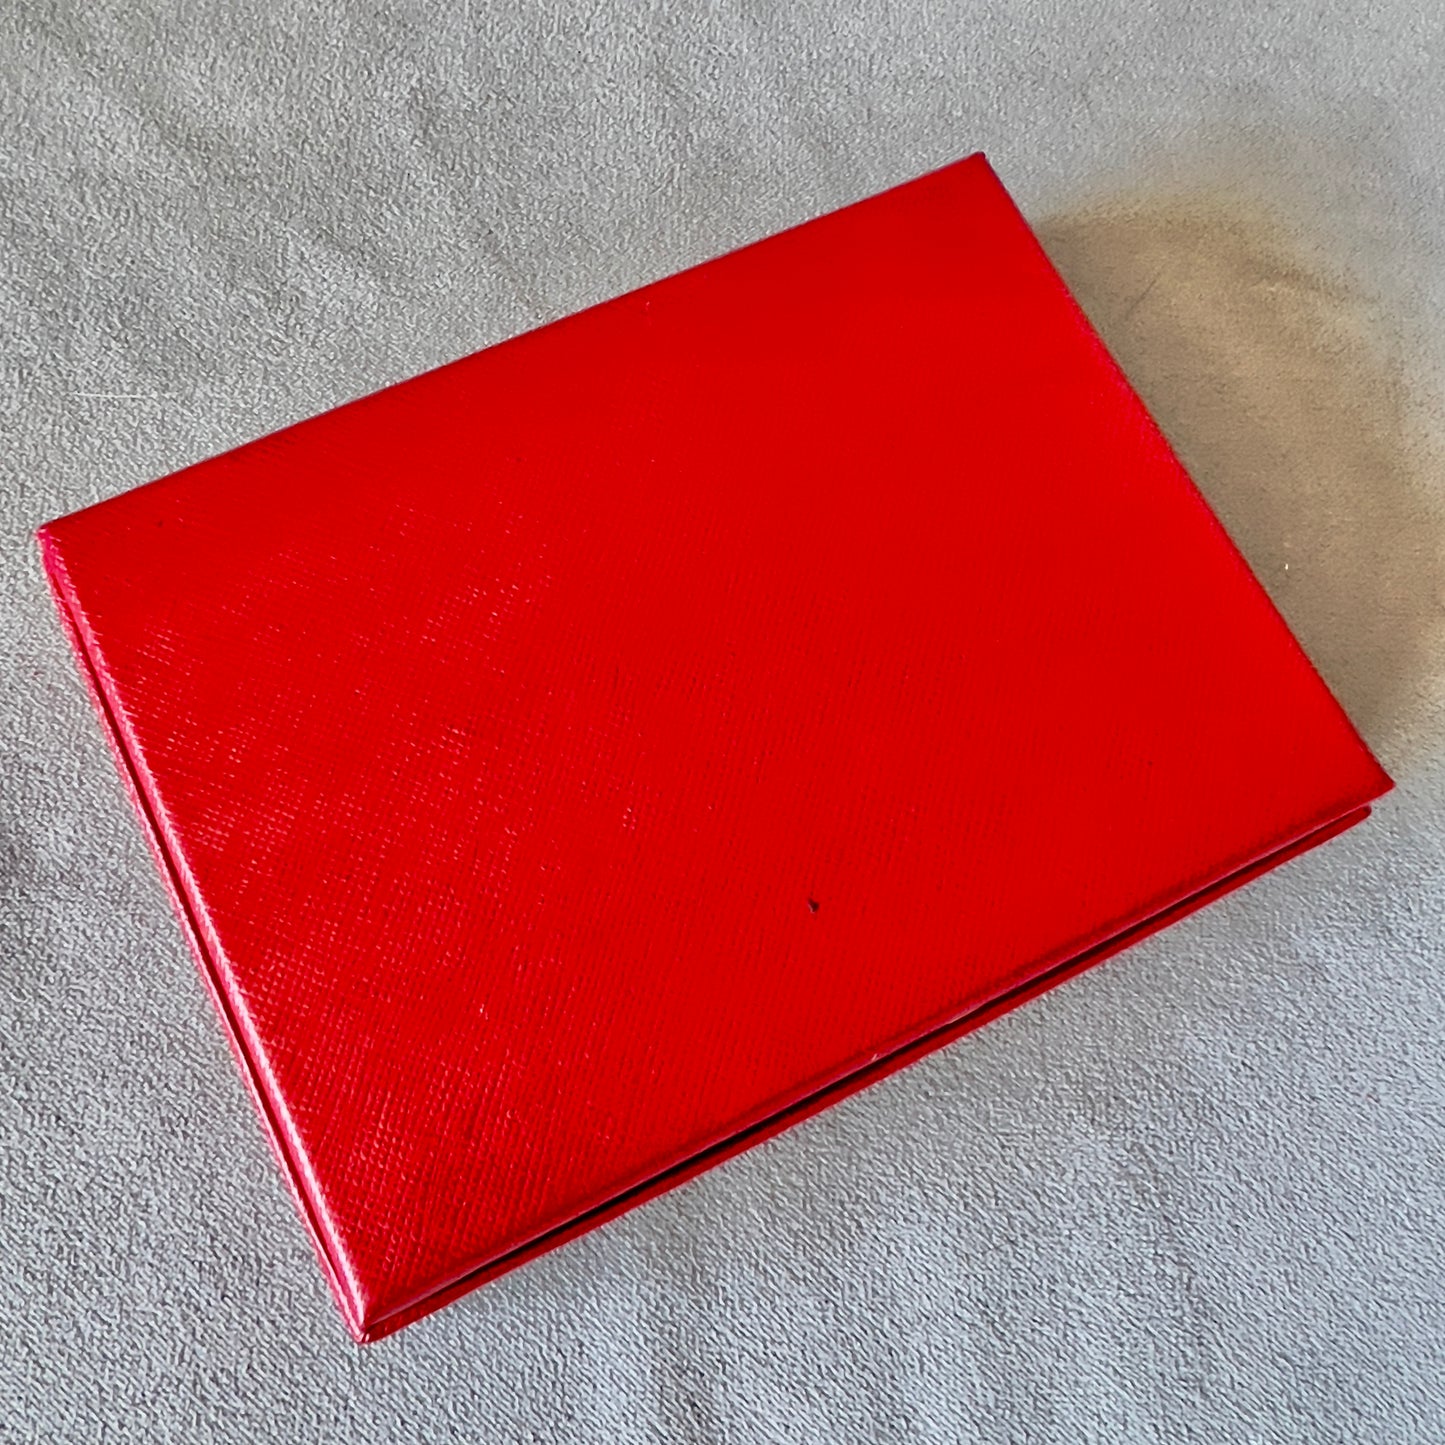 CARTIER Leather Goods Box 5.10x3.80x1.10 inches + Wrapping Cloth + Certificate + Card